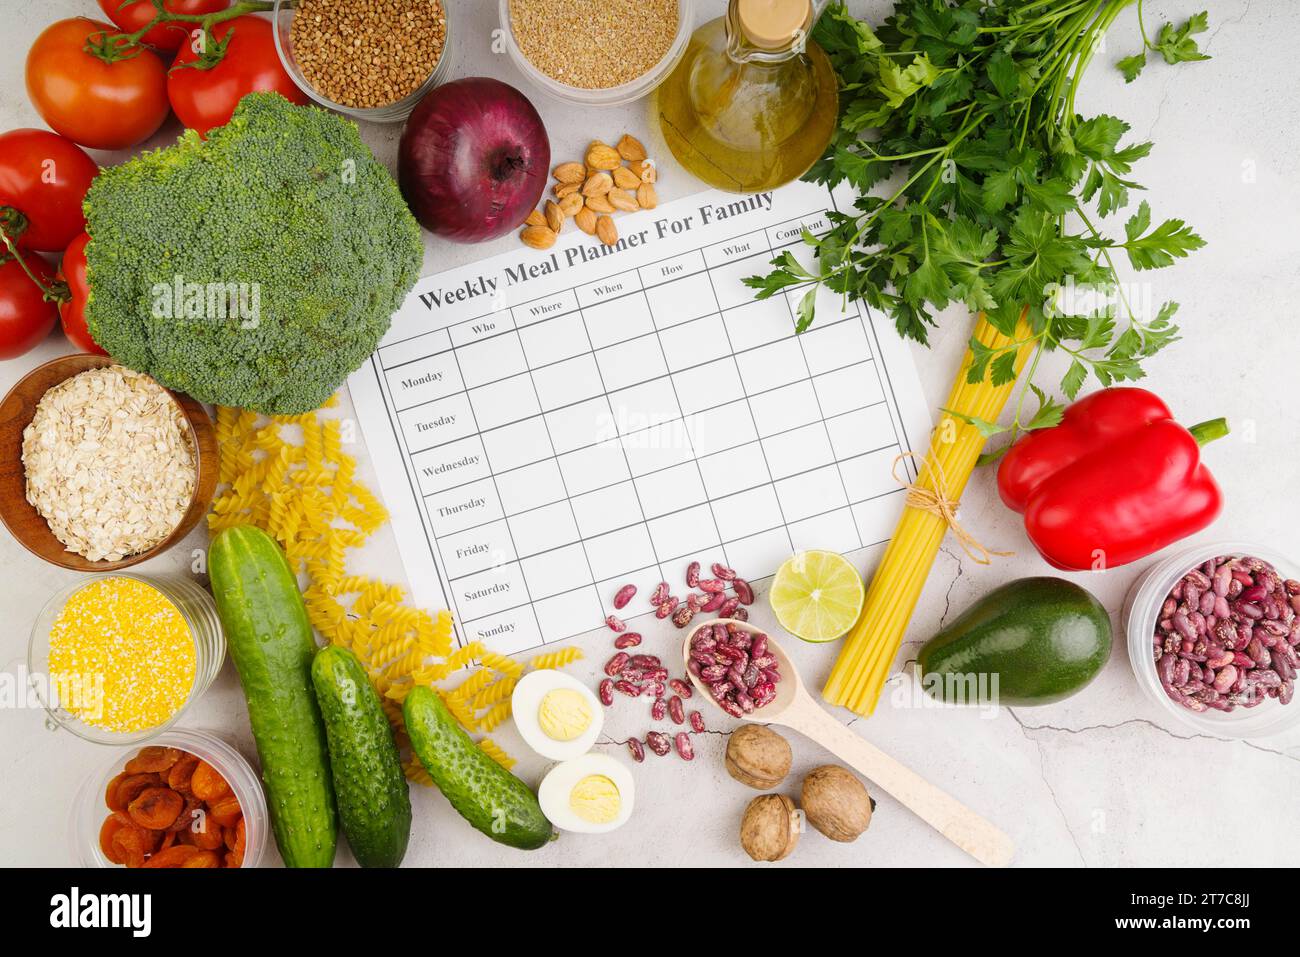 Weekly meal planner family concept Stock Photo